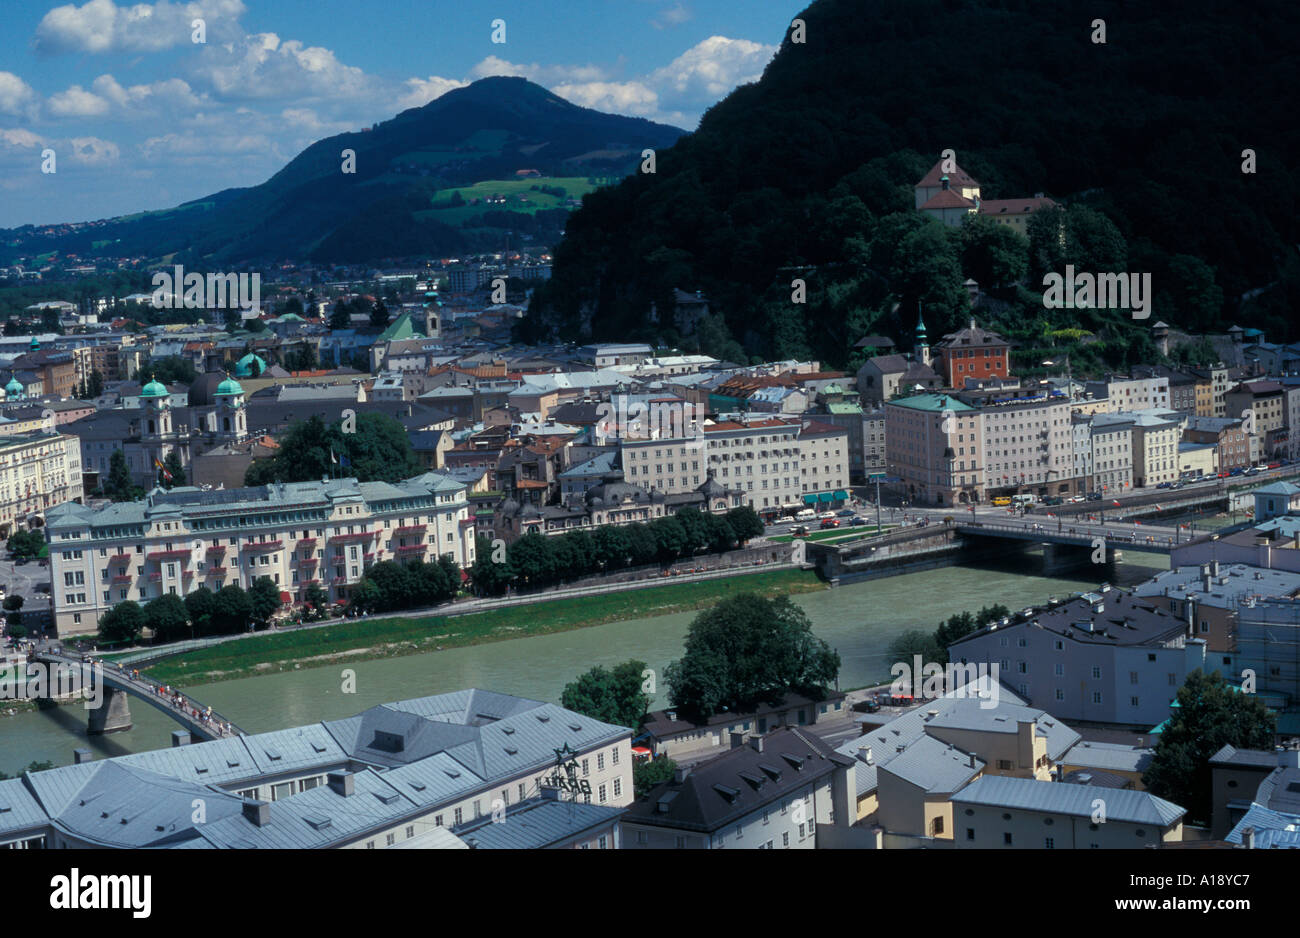 A view across Saltzburg from above the city Austria Stock Photo